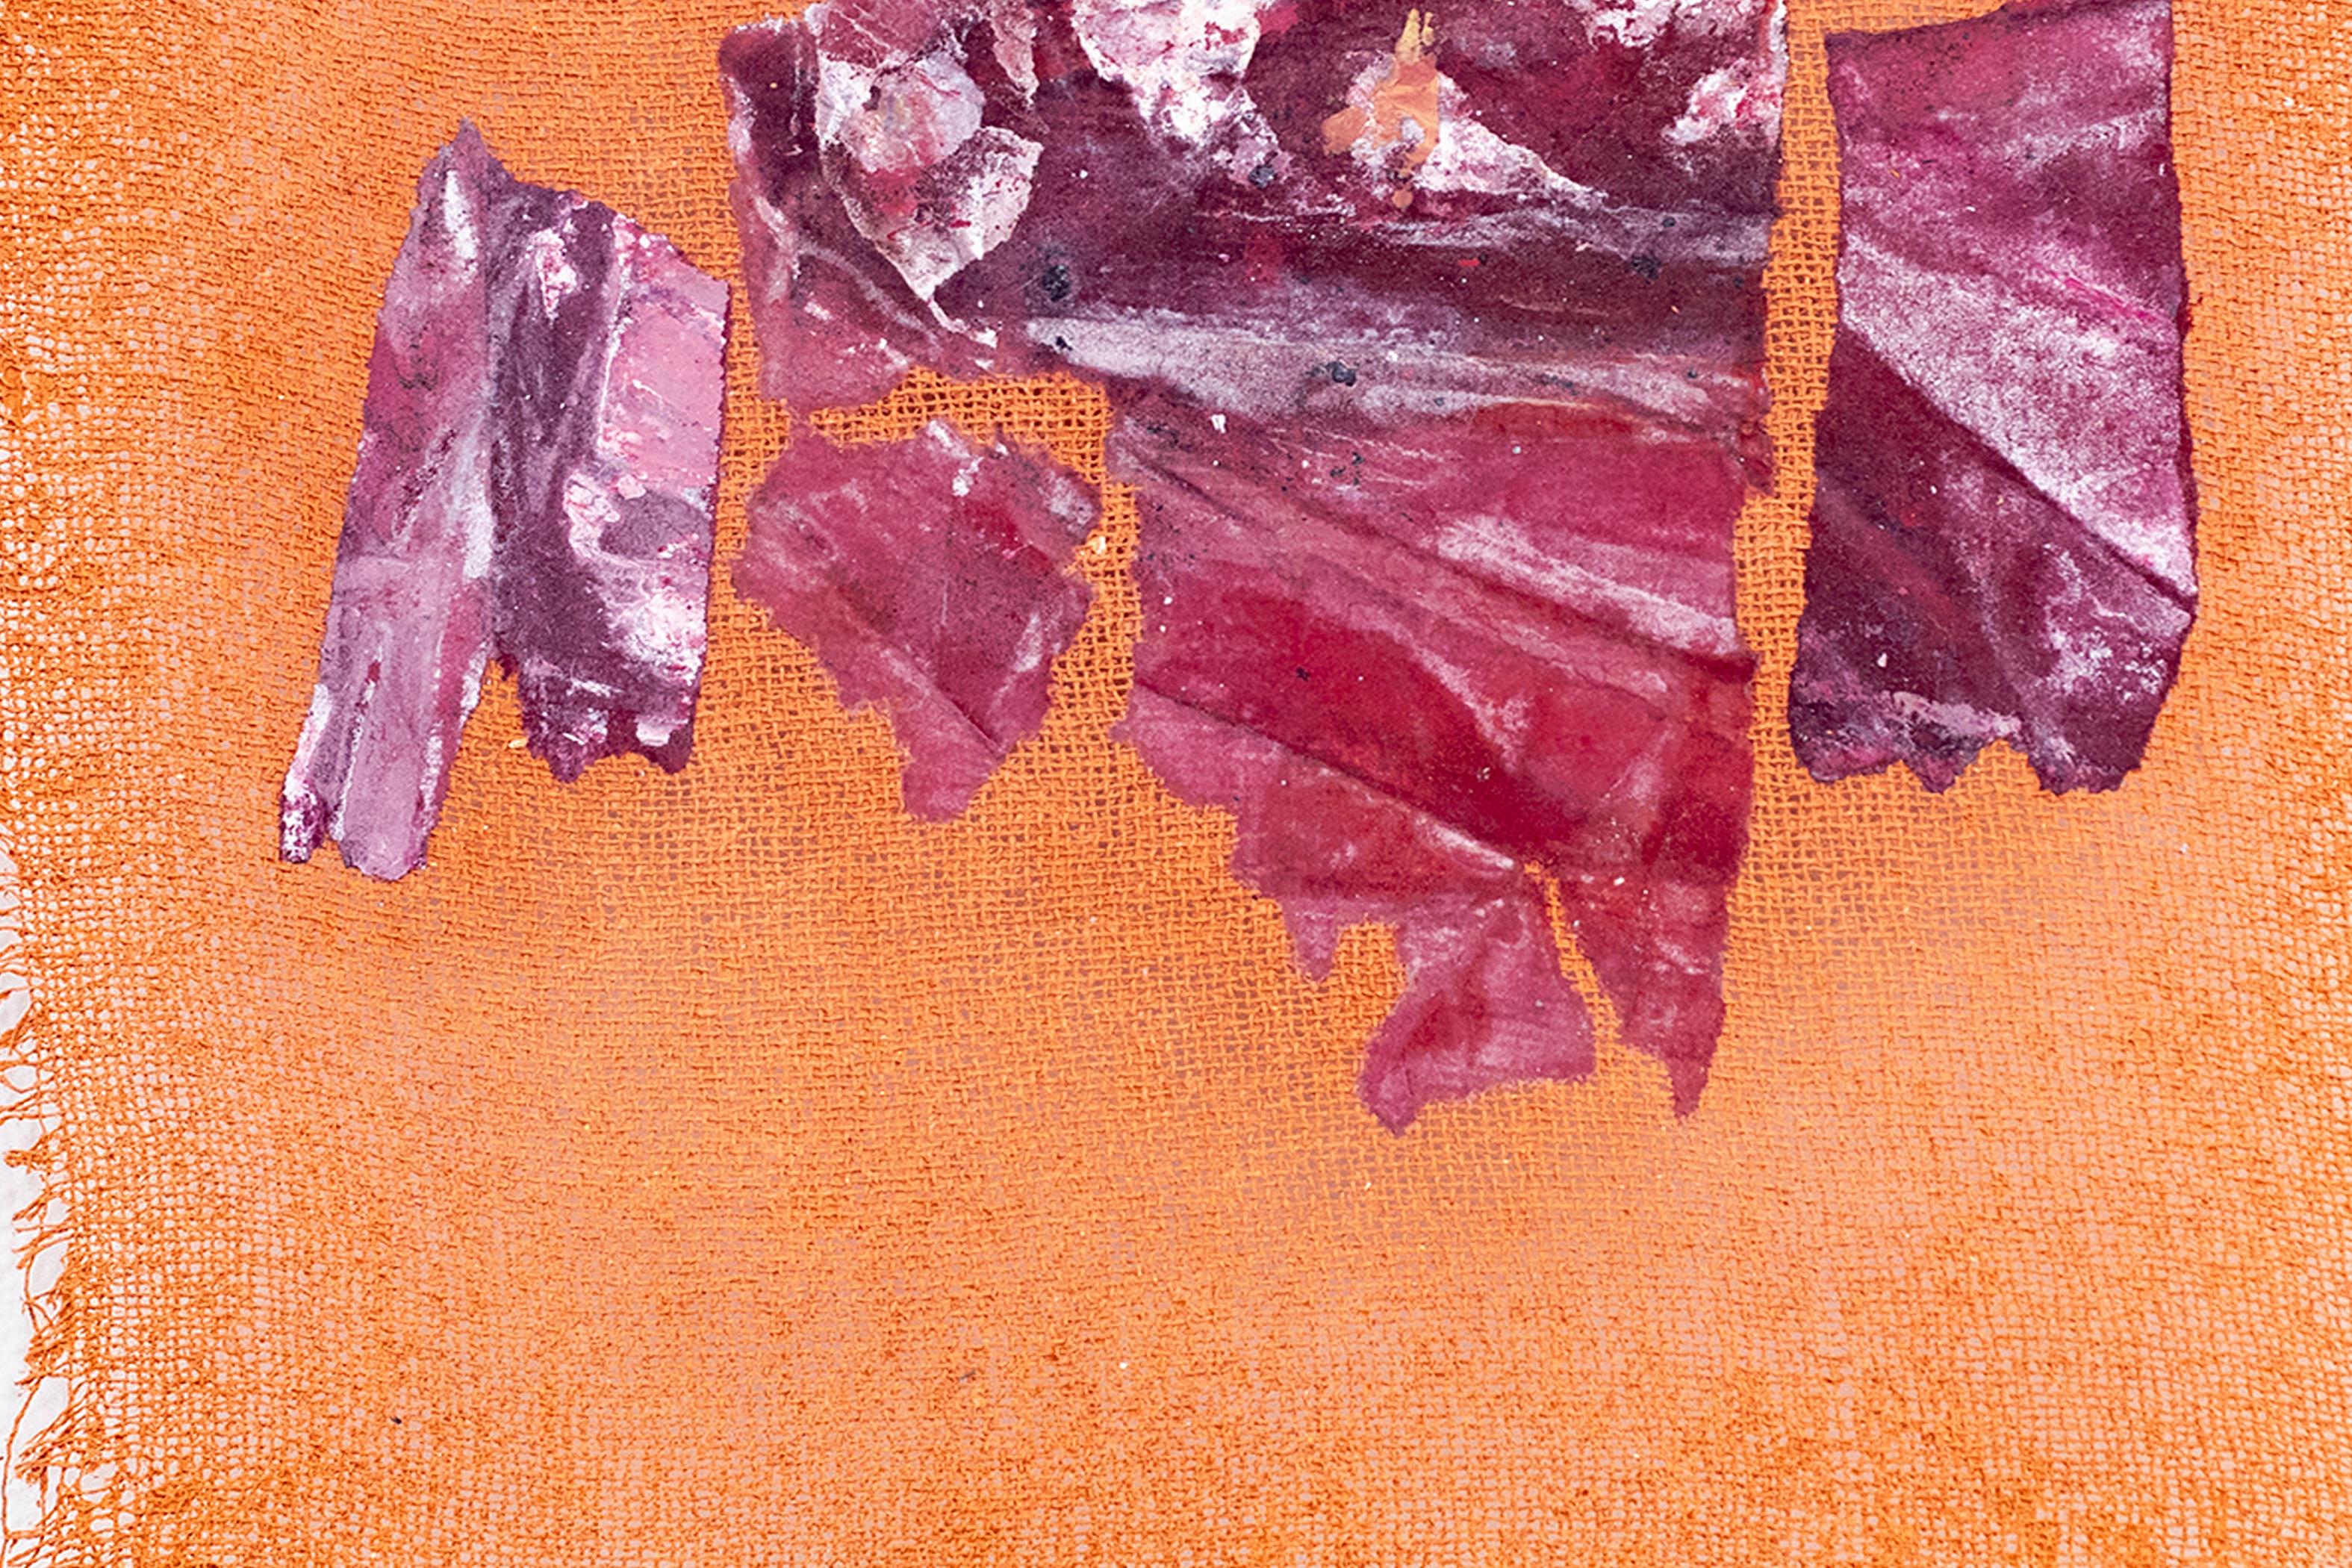 Meat, Mulberry paper and acrylic on gauze 3